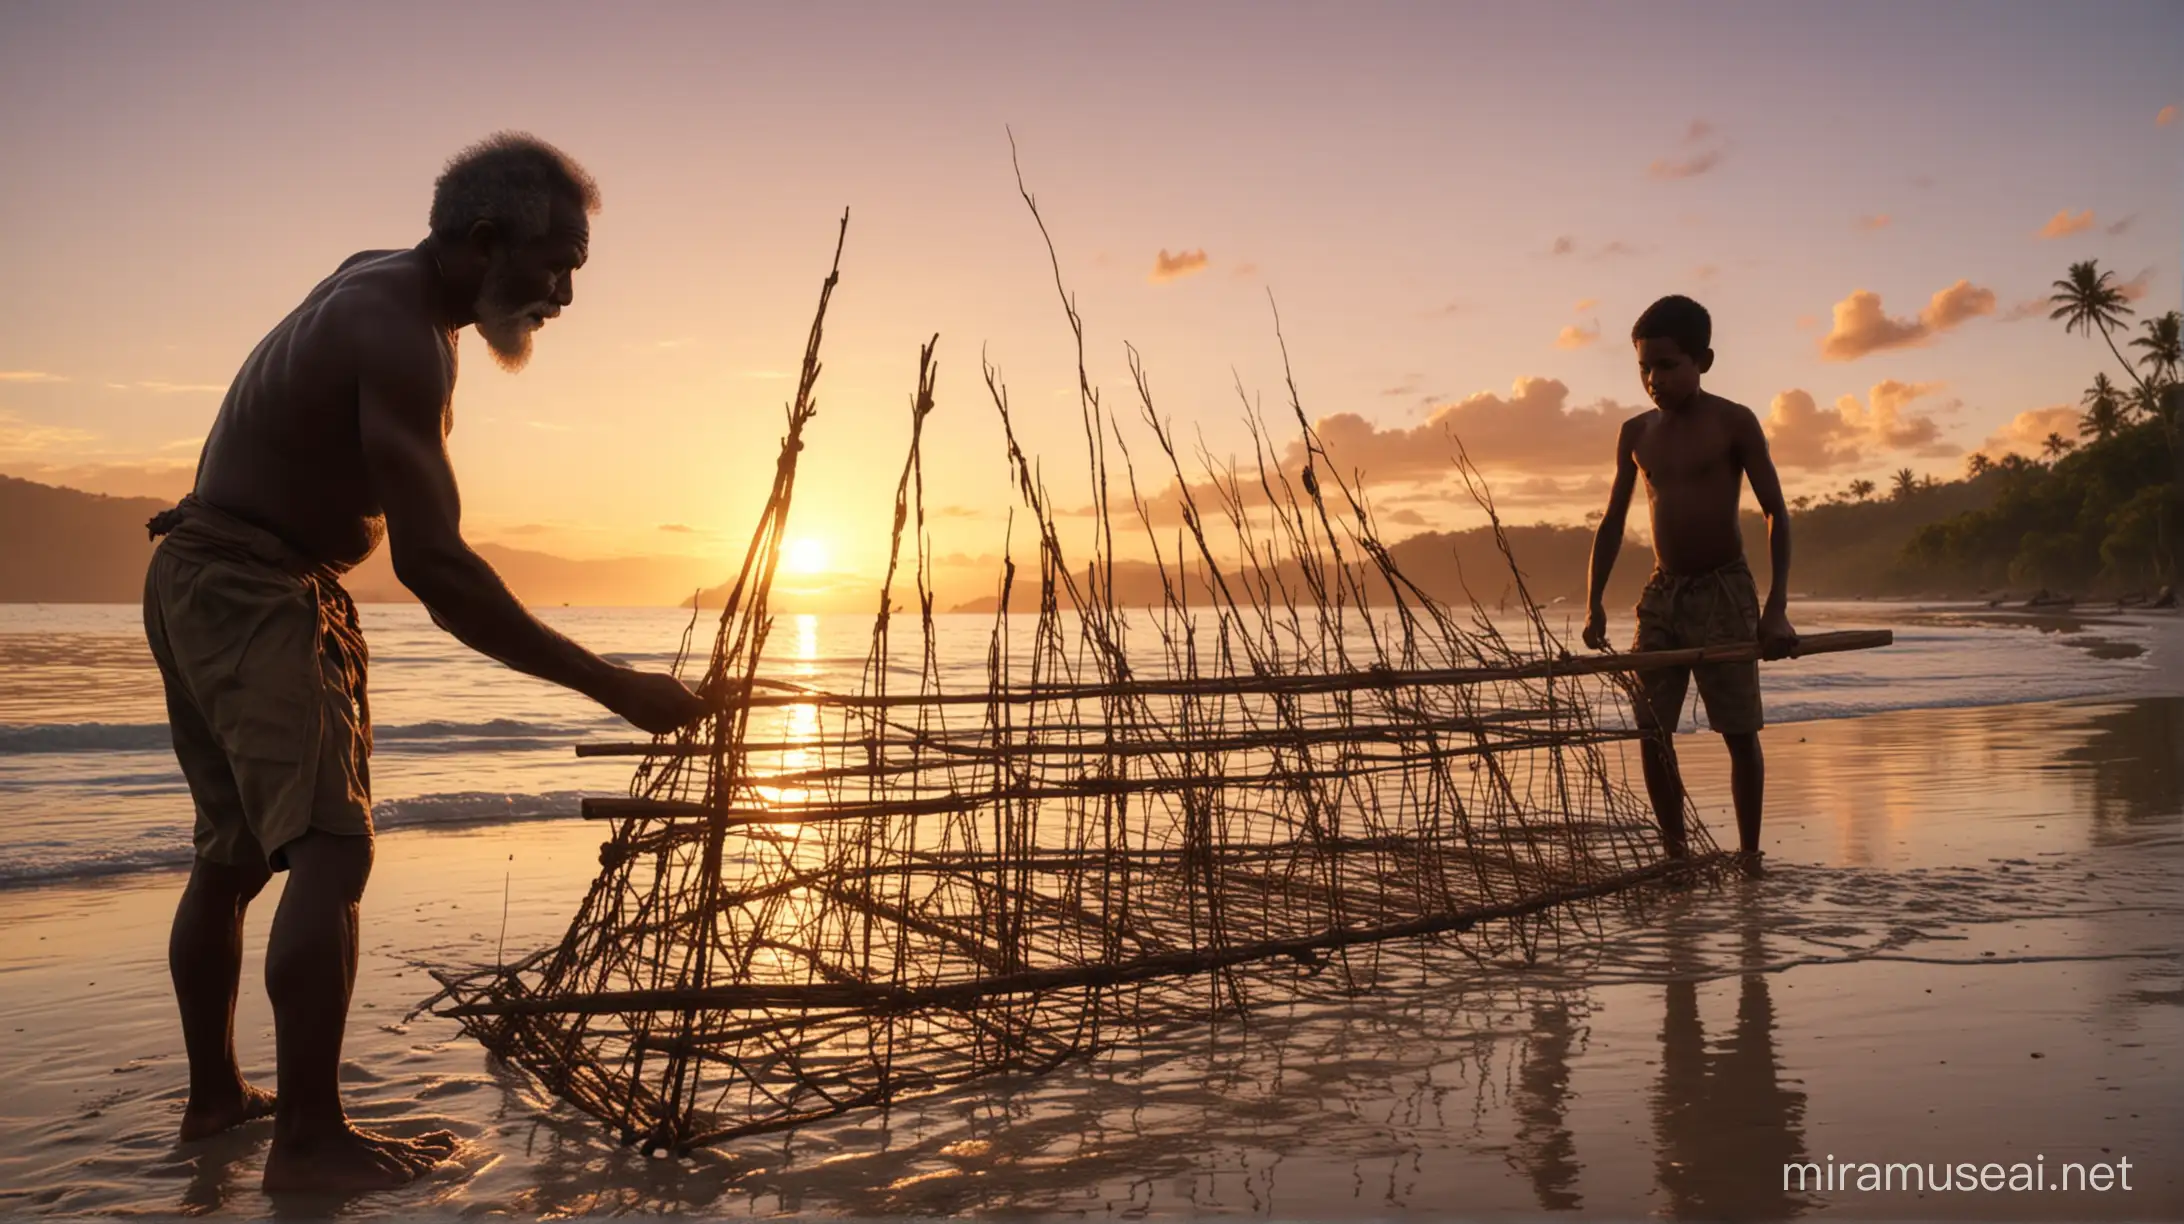 best quality, 8k, high resolution, masterpiece 1.2) very detailed, realistic. A grandfather from Papua is making fish traps with his grandchildren on the beach at sunset